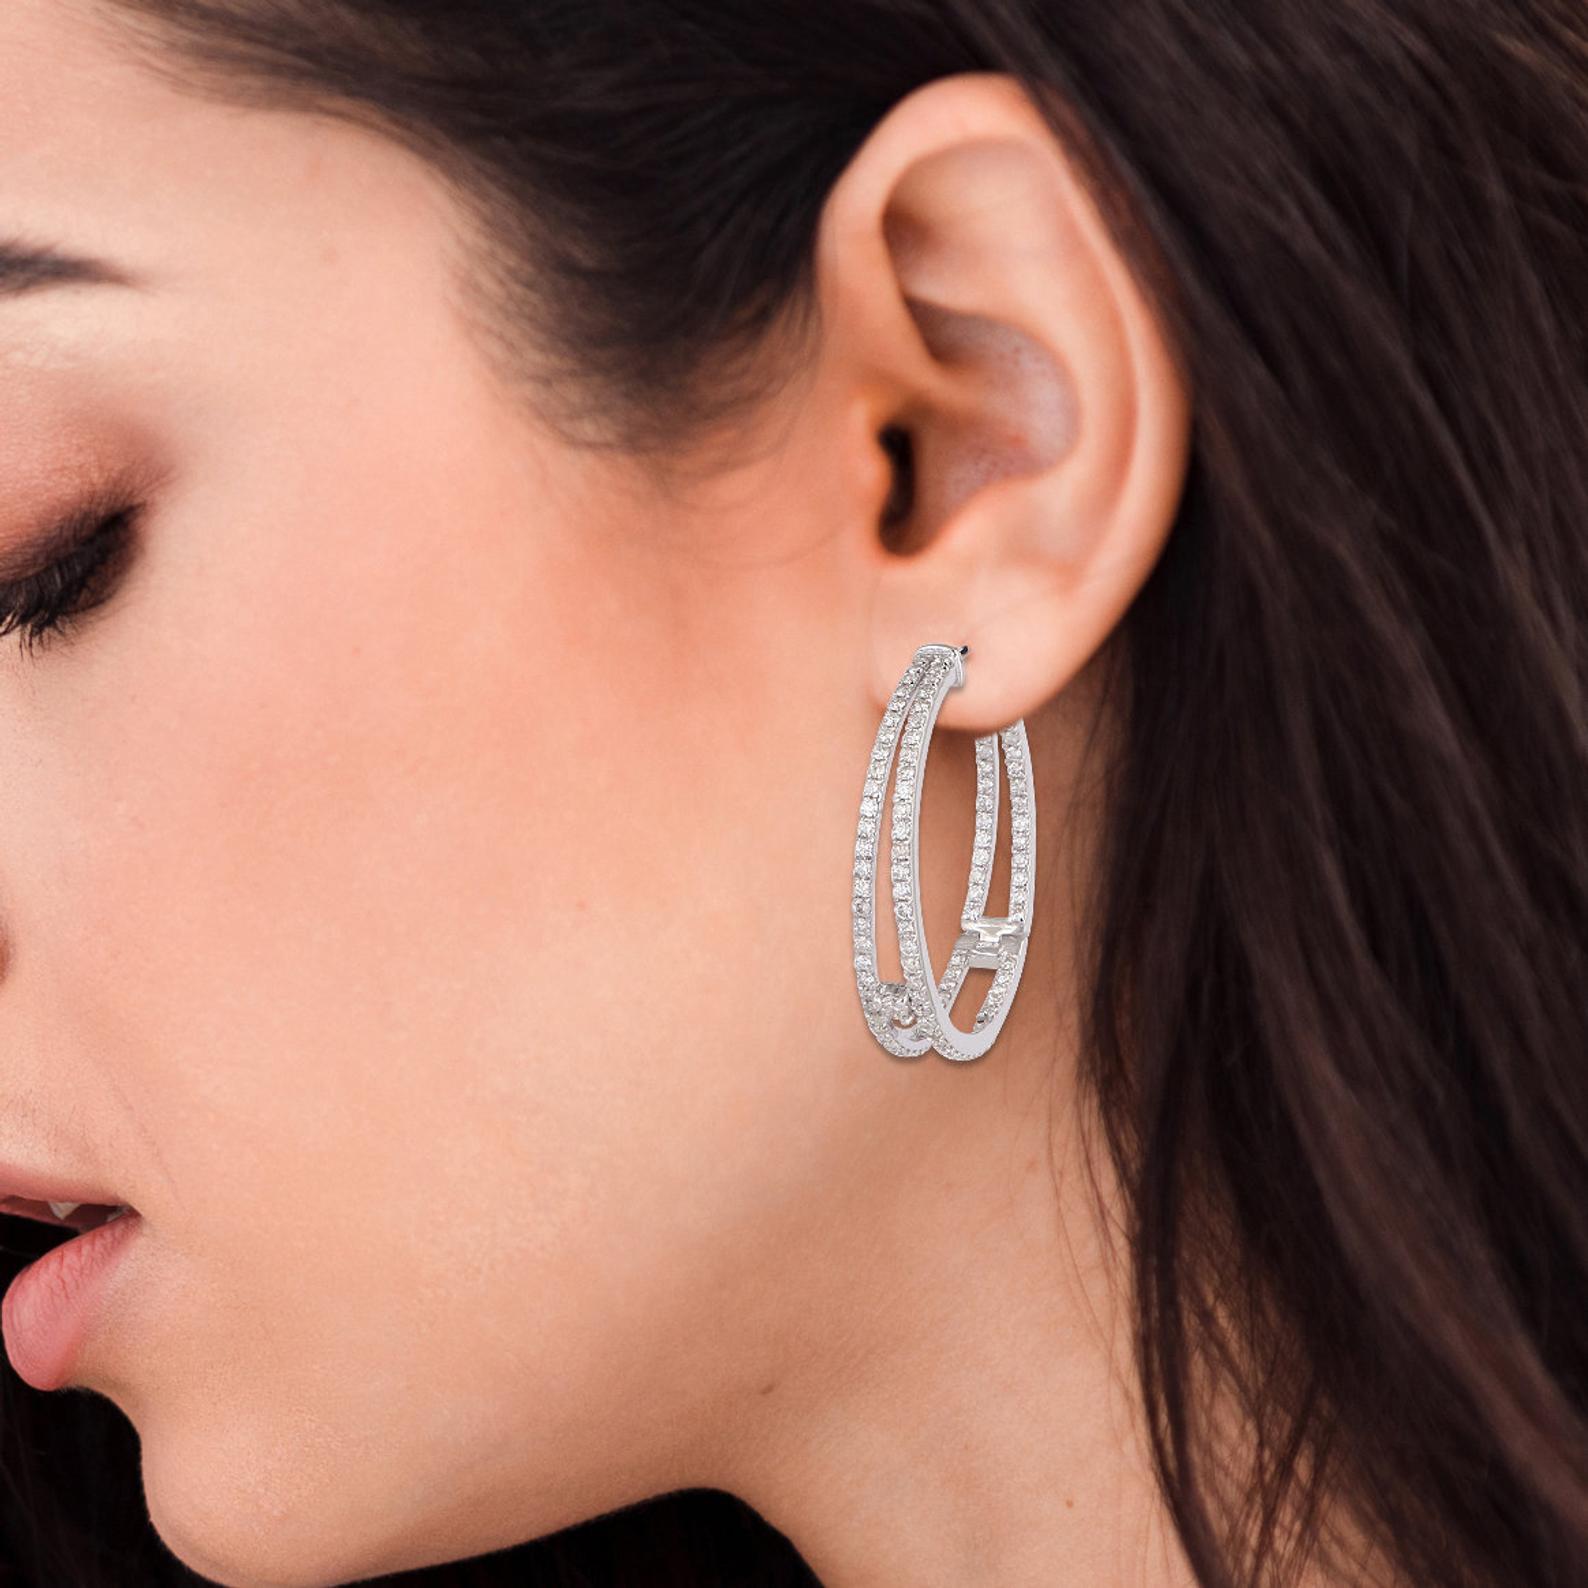 Cast from 18-karat white gold, these hoop earrings are hand set with 1.80 carats of pave diamonds.

FOLLOW MEGHNA JEWELS storefront to view the latest collection & exclusive pieces. Meghna Jewels is proudly rated as a Top Seller on 1stdibs with 5